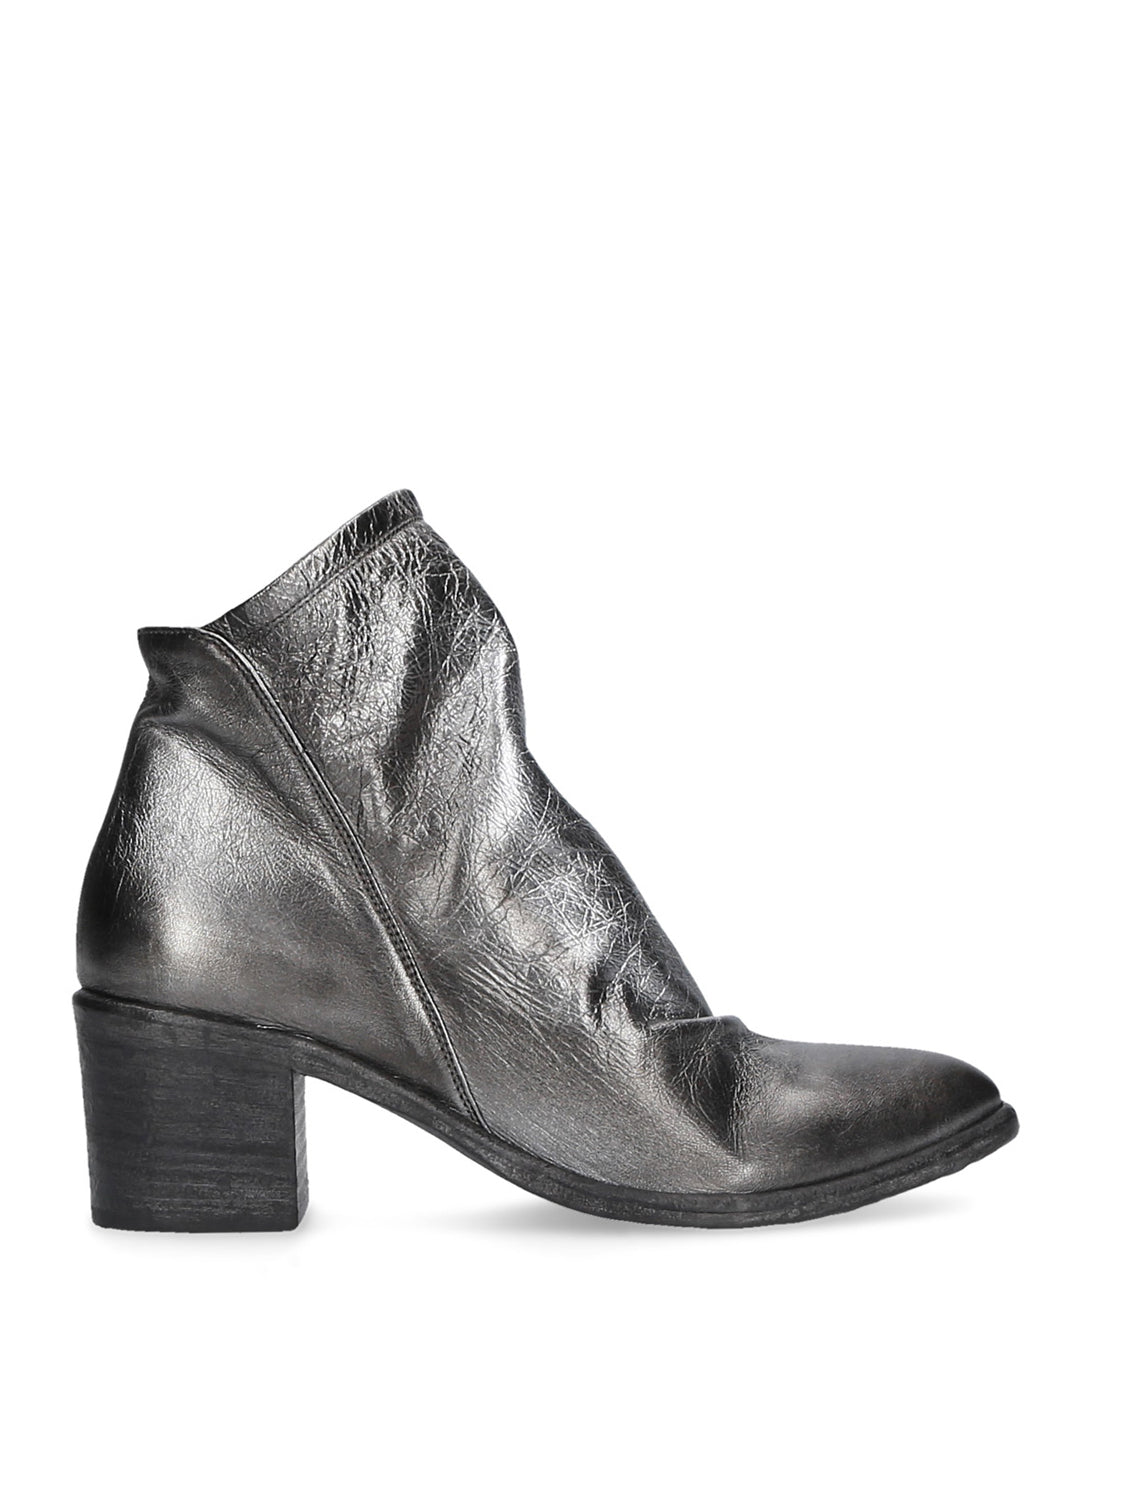 STEEL ANKLE BOOTS